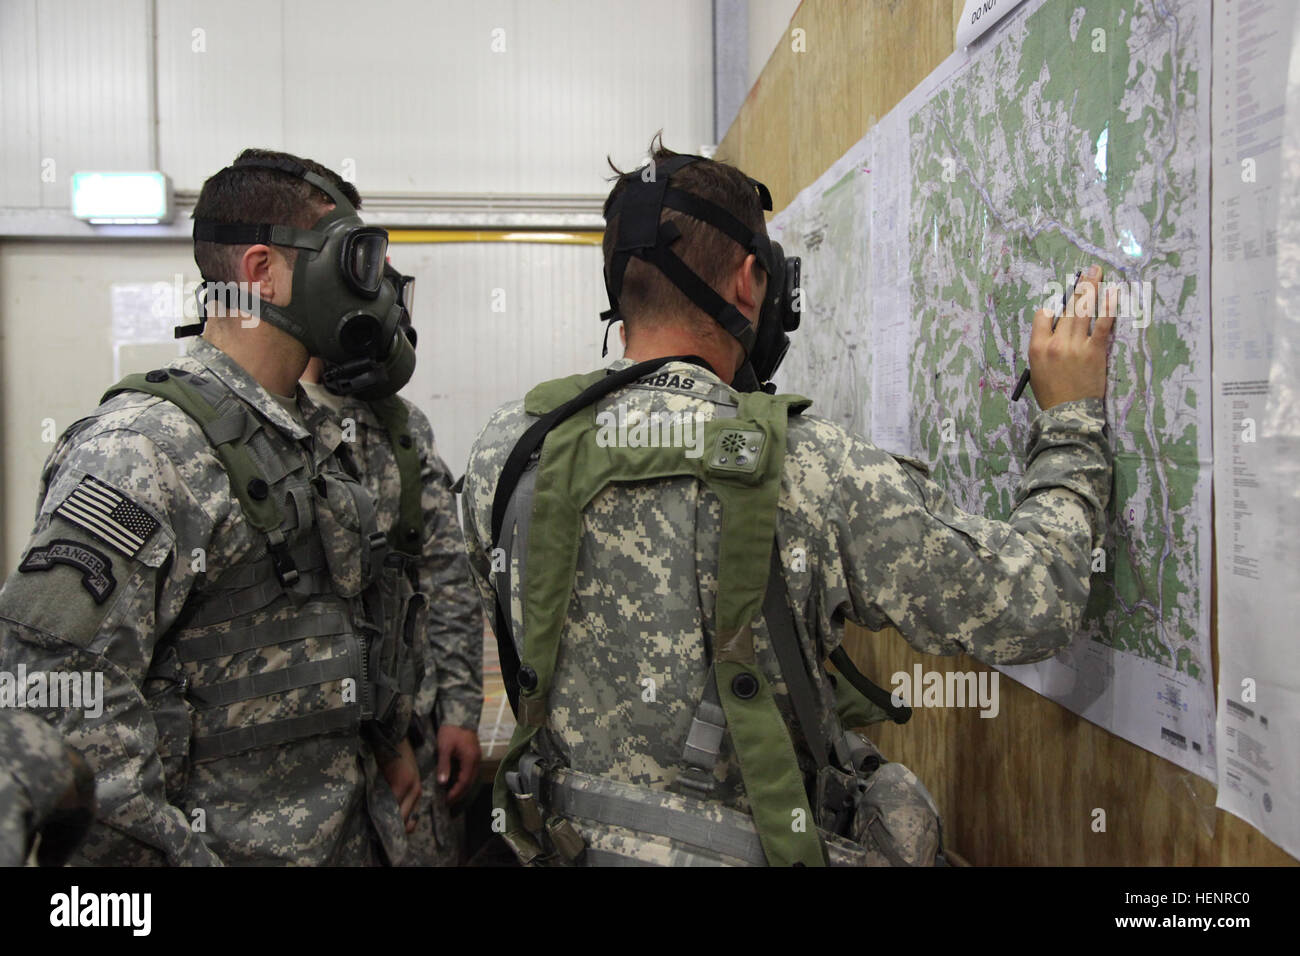 U.S. Soldiers reference a map during a simulated chemical attack while participating in training exercise Saber Junction 2014 at the Joint Multinational Readiness Center in Hohenfels, Germany, Sept. 4, 2014. Saber Junction 2014 prepares U.S., NATO allies and European security partners to conduct unified land operations through the simultaneous combination of offensive, defensive and stability operations appropriate to the mission and the environment. More information about Saber Junction 2014 can be found at http://www.eur.army.mil/SaberJunction/. (U.S. Army photo by Staff Sgt. Carol A. Lehman Stock Photo